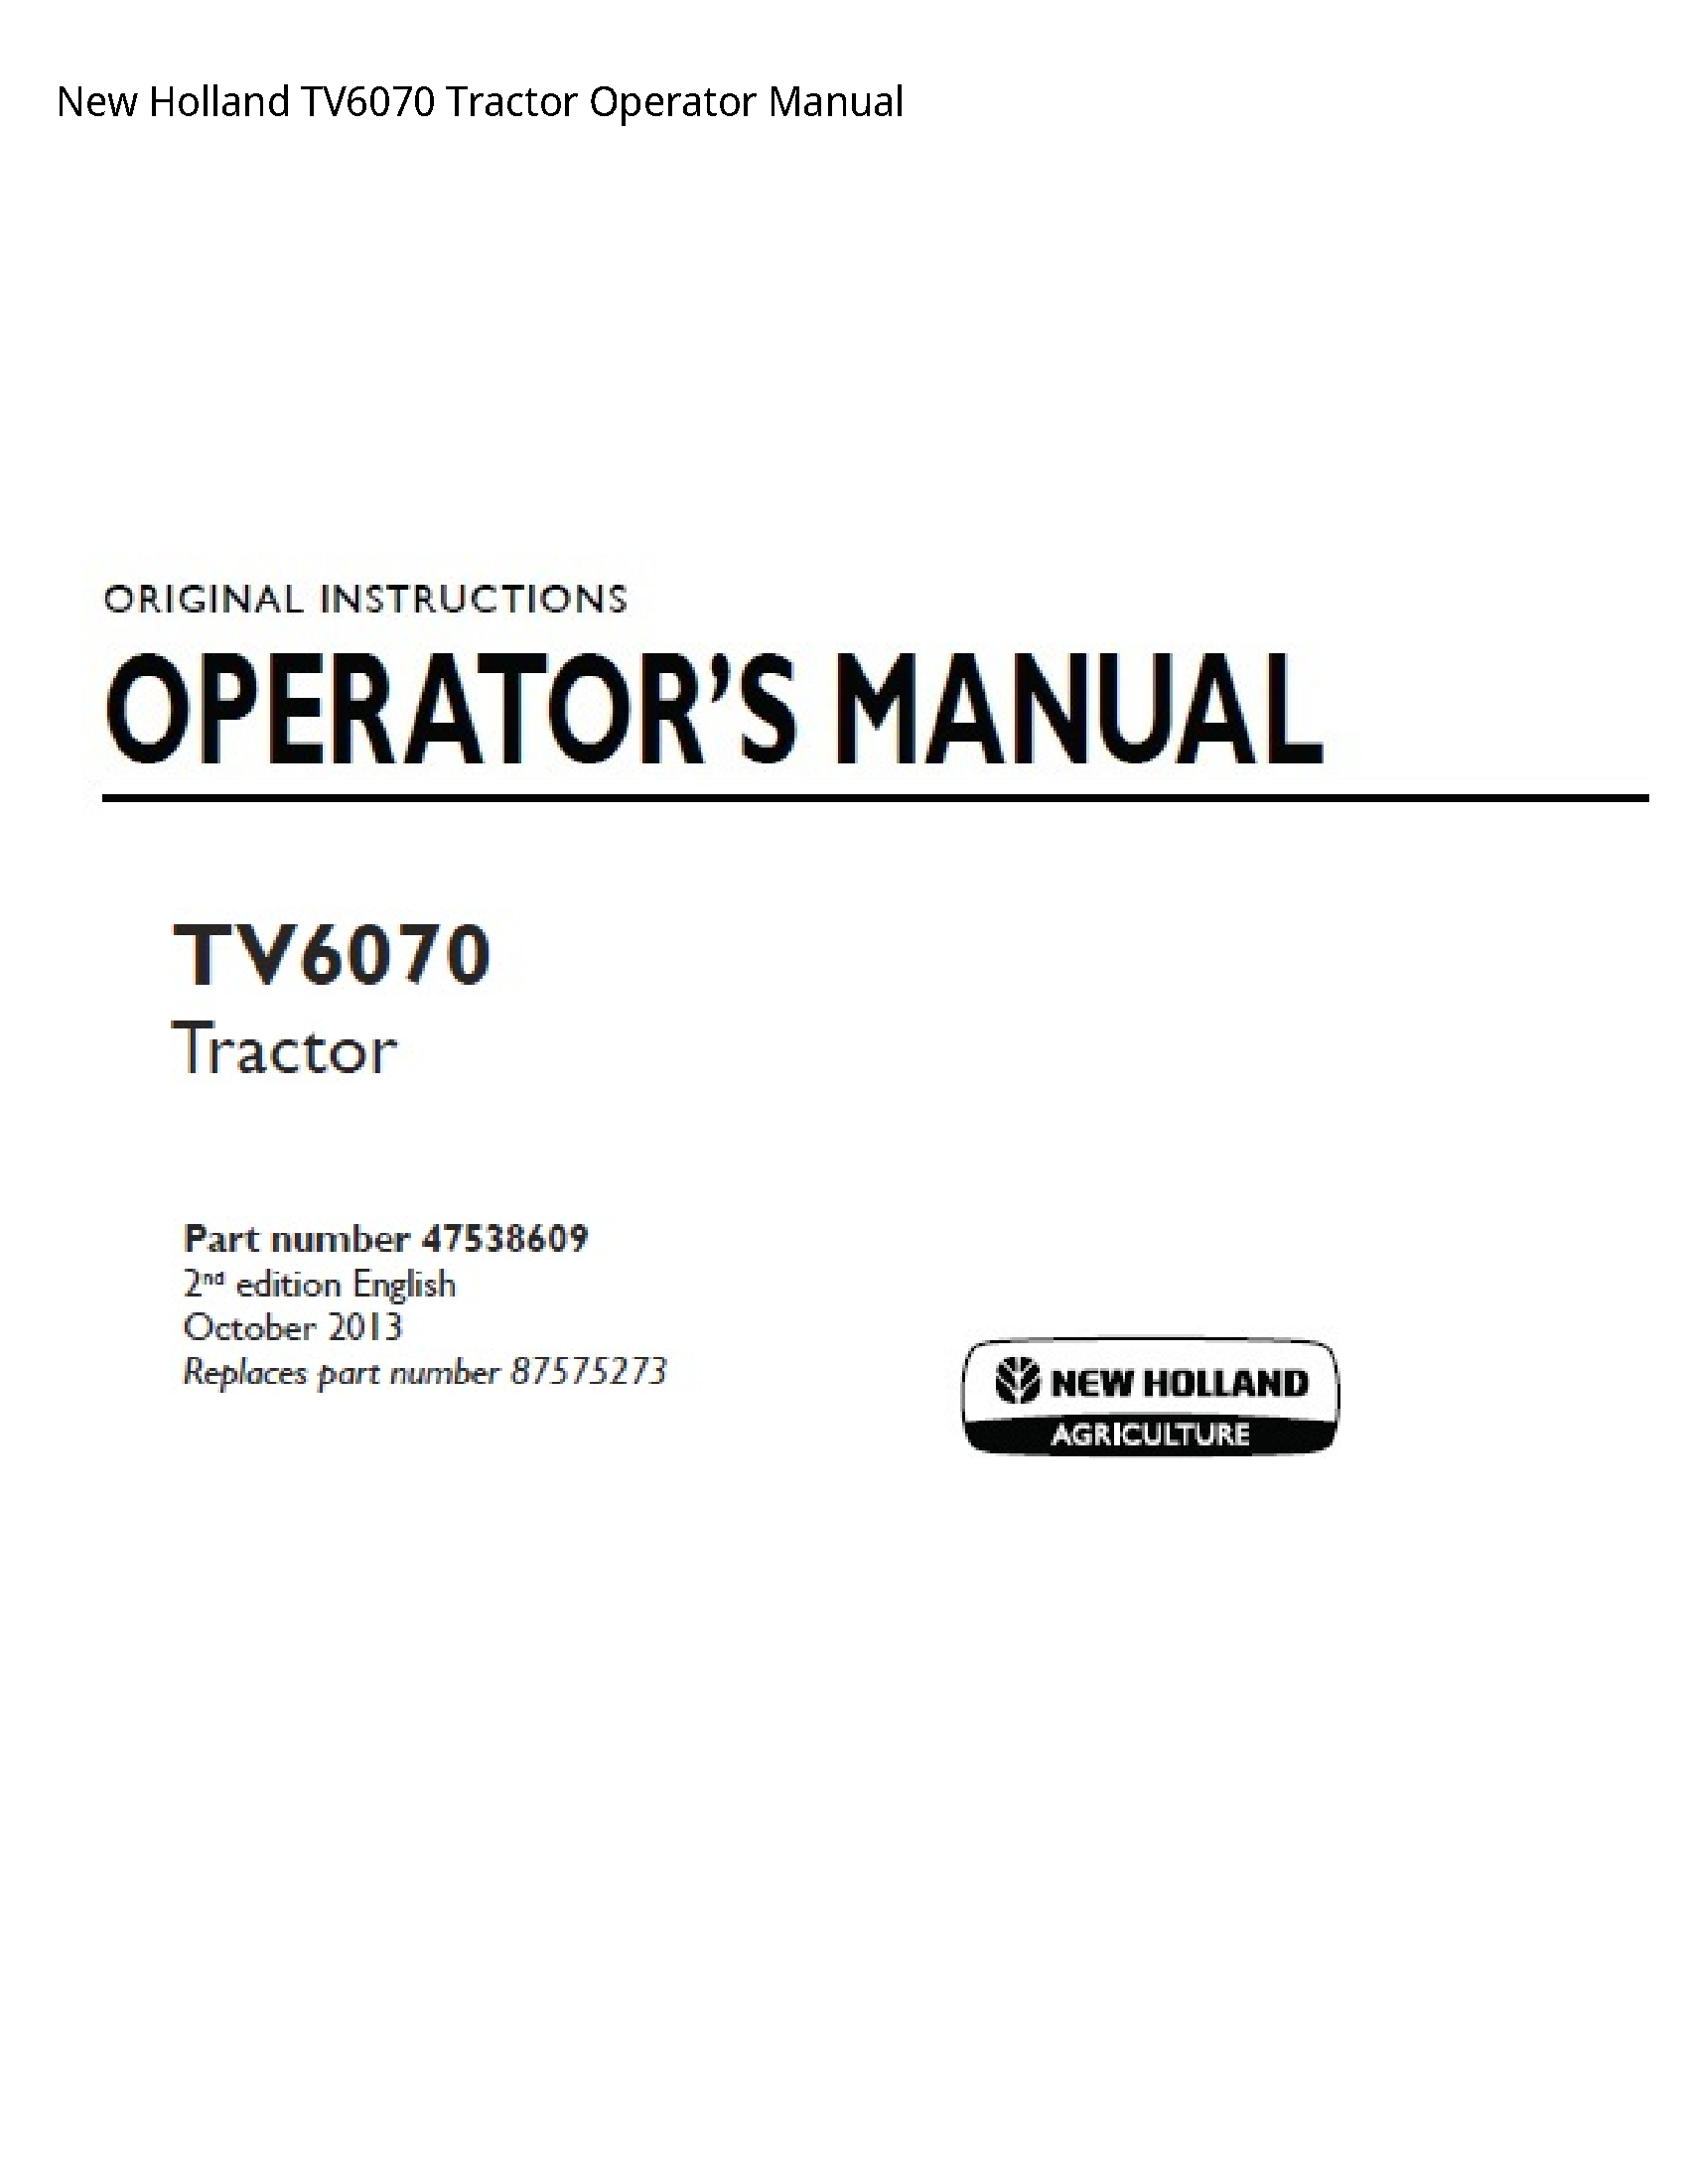 New Holland TV6070 Tractor Operator manual